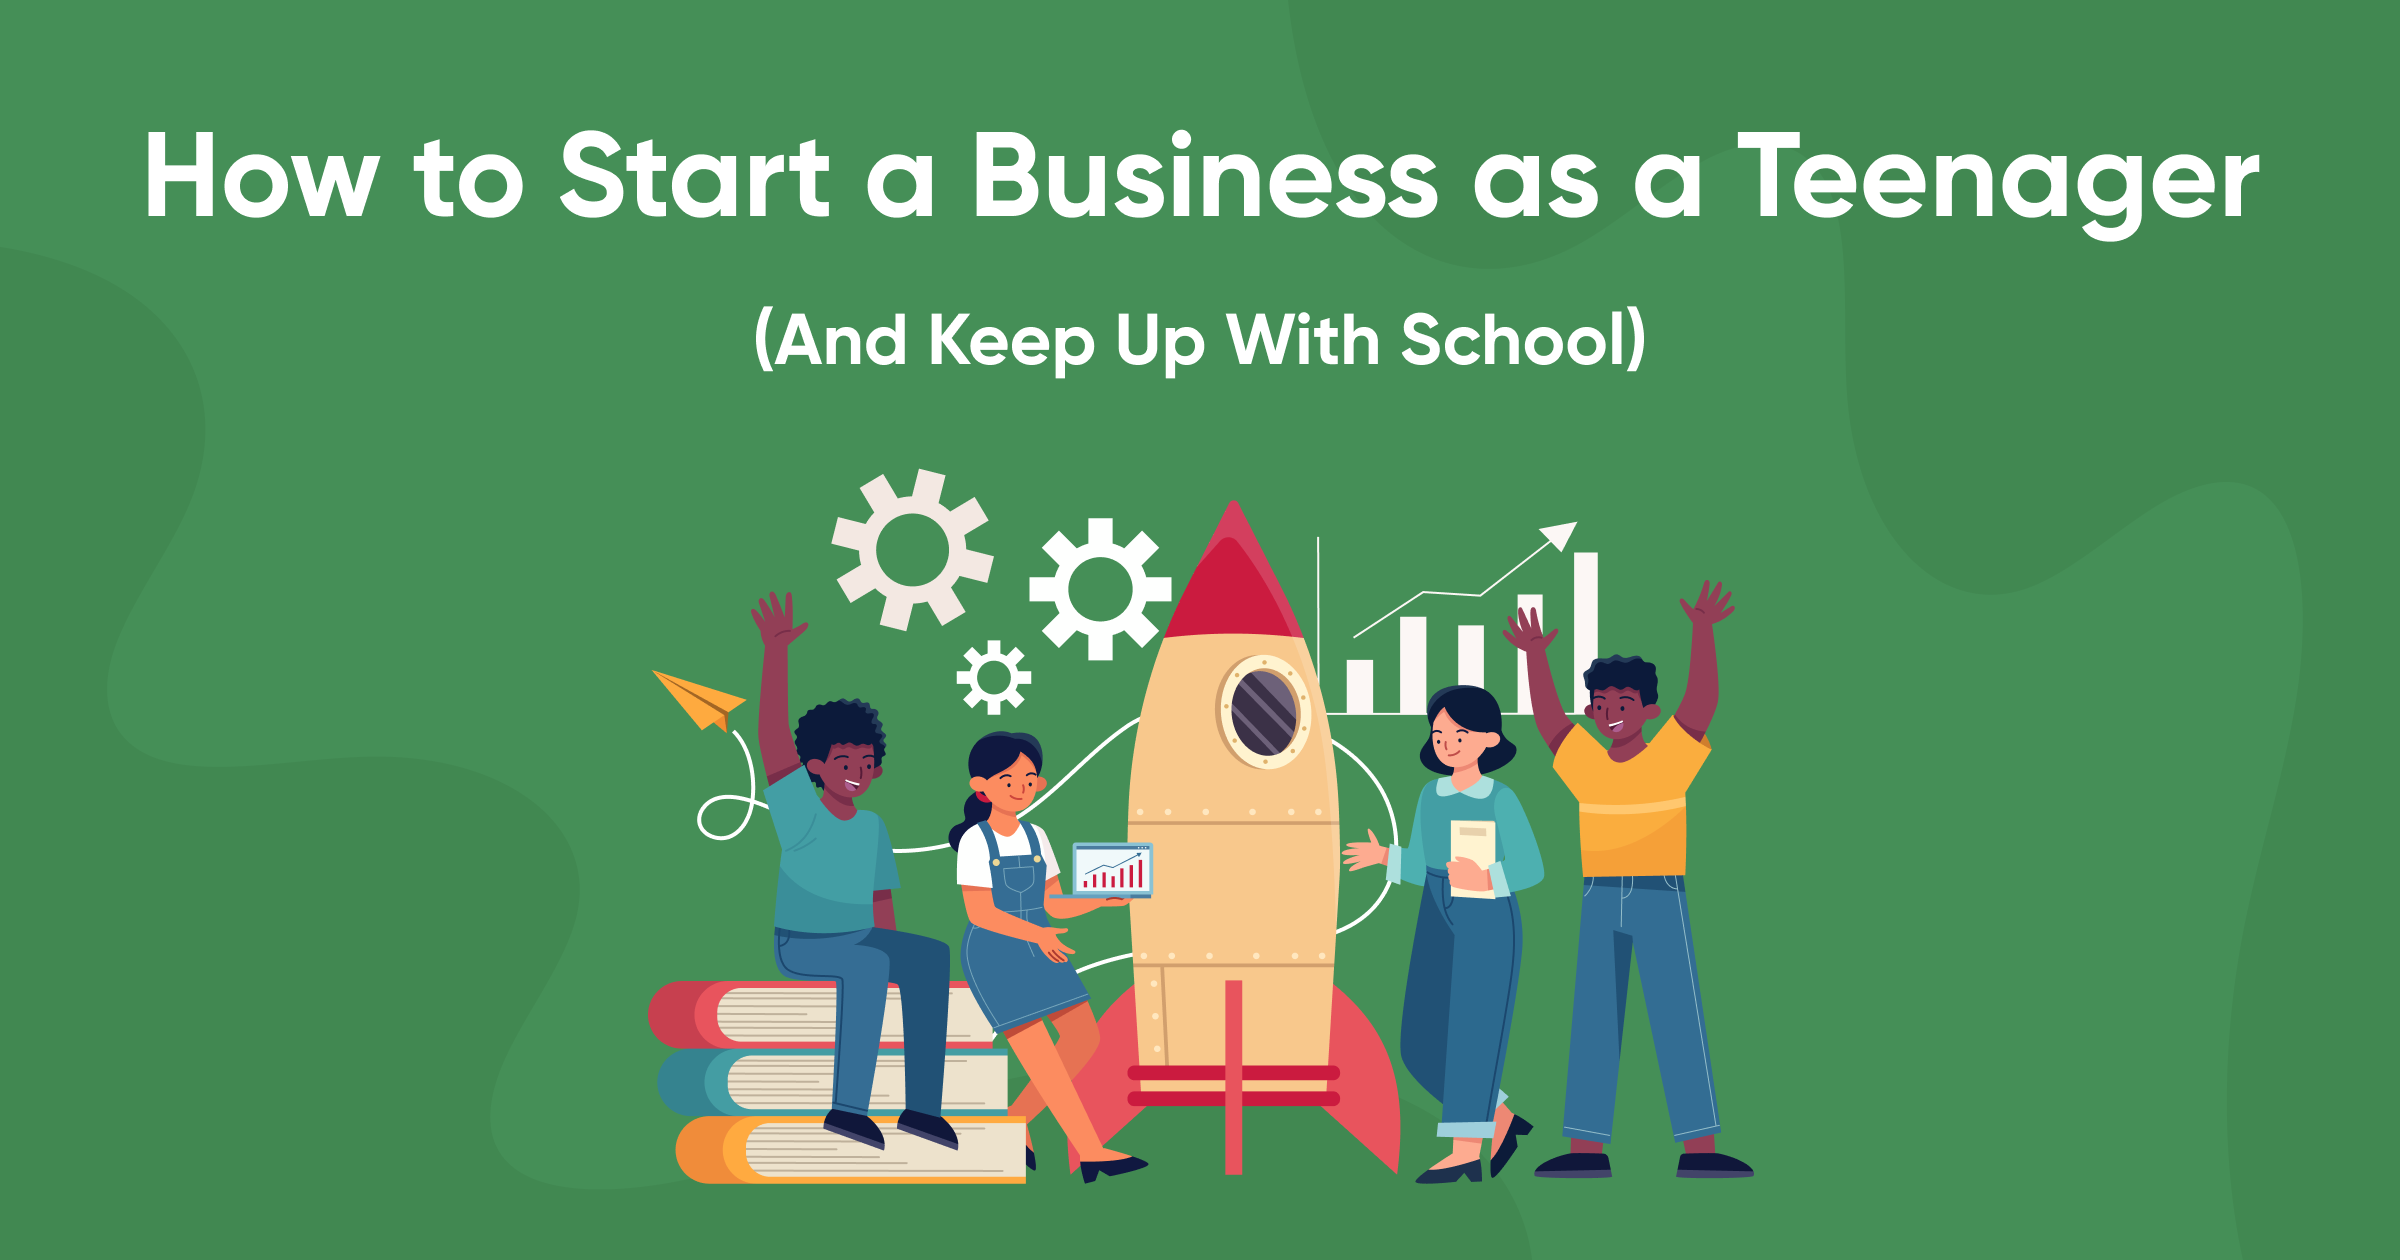 How to Start a Business as a Teenager (And Keep Up With School)